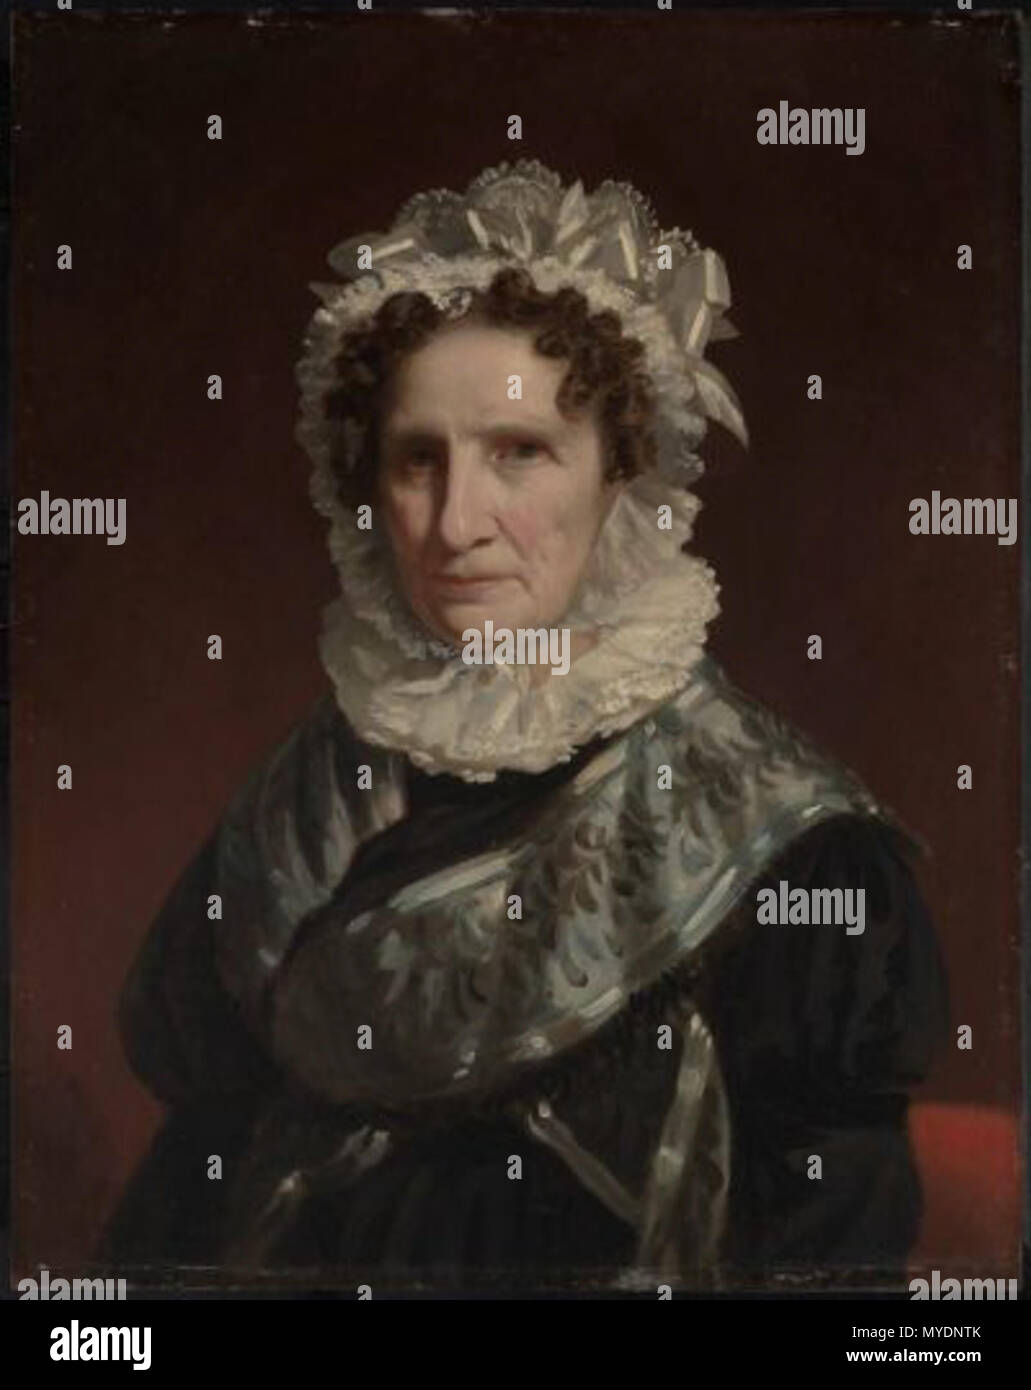 . Madam Powel (Elizabeth Willing). about 1825. By Francis Alexander, American, 1800–1880. 76.52 x 60.32 cm (30 1/8 x 23 3/4 in.). Oil on panel. Museum of Fine Arts, Boston. 1825.   Francis Alexander  (1800–1880)     Description American painter  Date of birth/death 3 February 1800 27 March 1880  Location of birth/death Killingly Florence  Authority control  : Q5479973 VIAF: 44154388 ISNI: 0000 0000 6706 3648 ULAN: 500001550 LCCN: nr91025186 GND: 171958527 WorldCat 159 ElizabethWilling ca1825 byFrancisAlexander MFABoston Stock Photo